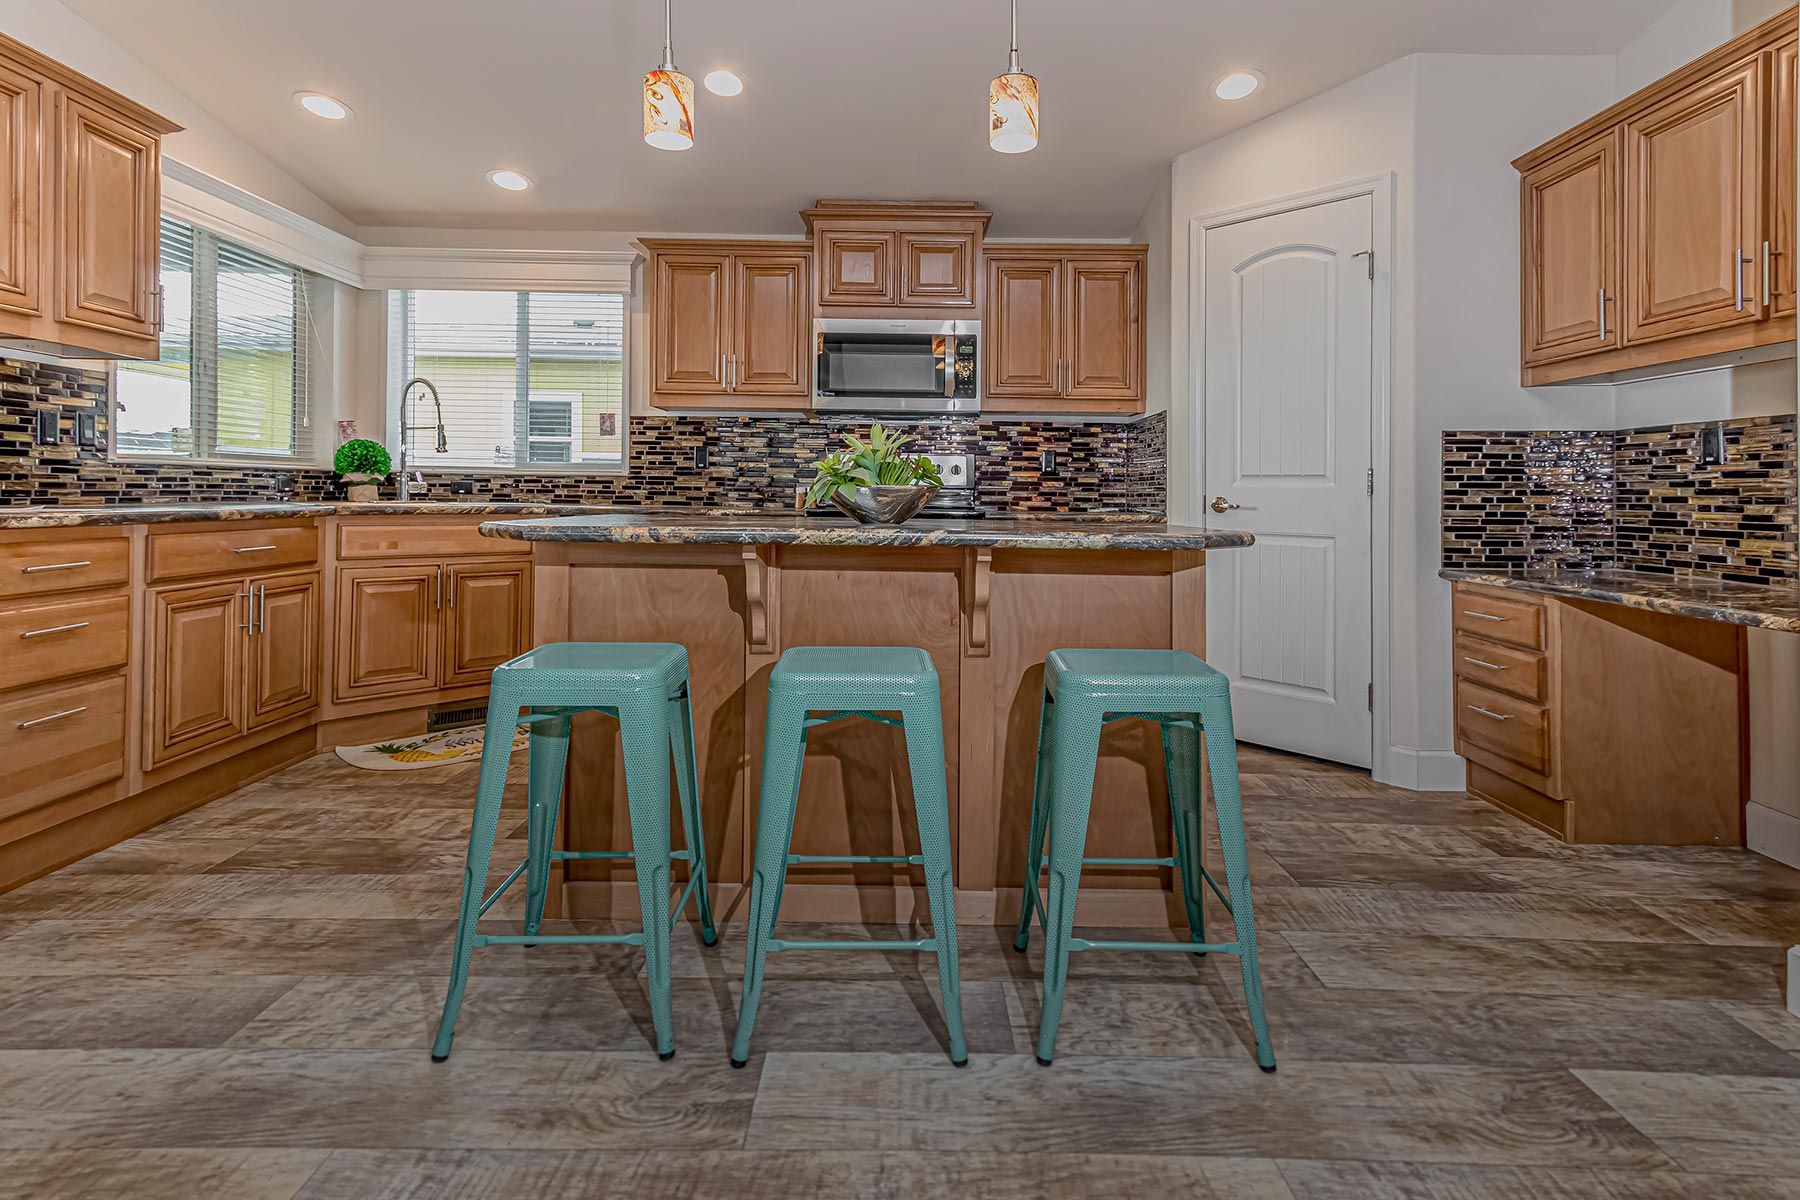 Skyline Homes Westridge 1473CT Manufactured Home Kitchen featuring island, walk-in pantry, appliances, small windows